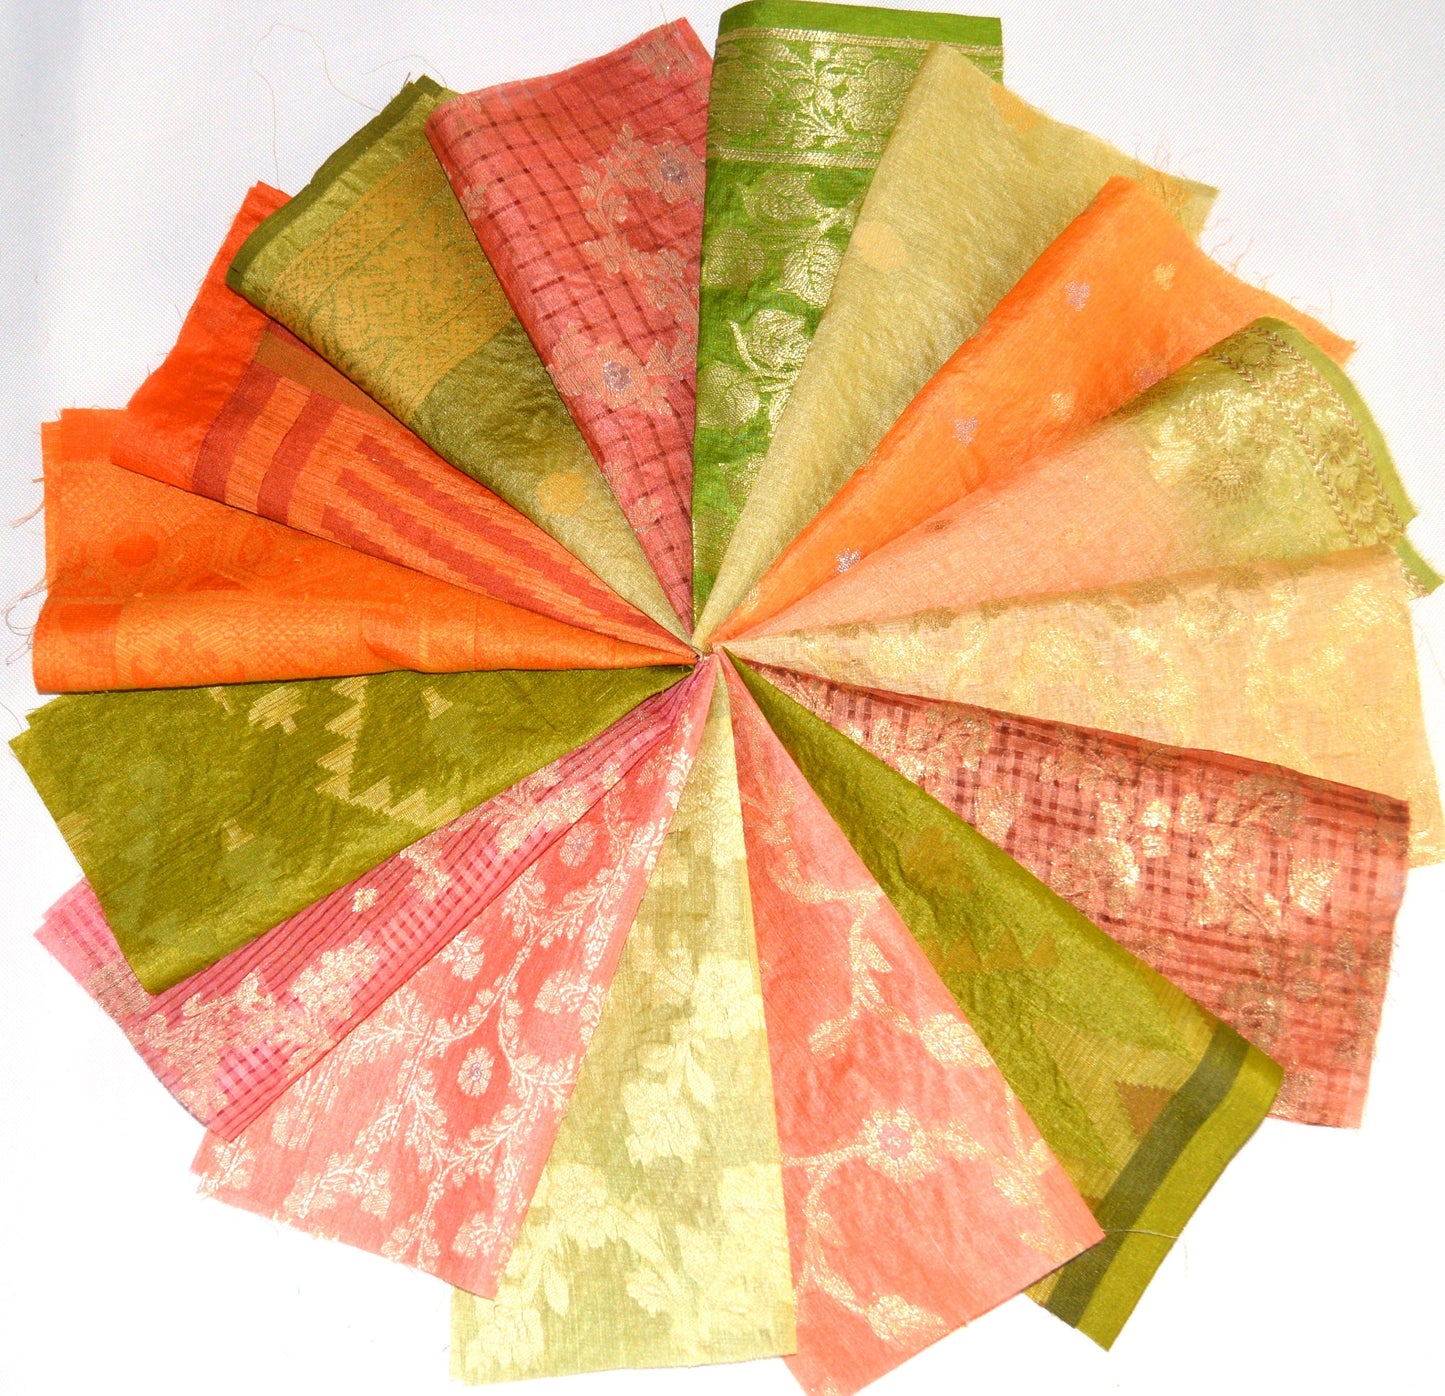 5 Inch x 16 Pieces Orange Green Recycled Vintage Sari Scraps Craft Fabric Card Making Collage Mixed Media Textile Art Sewing Junk Journals